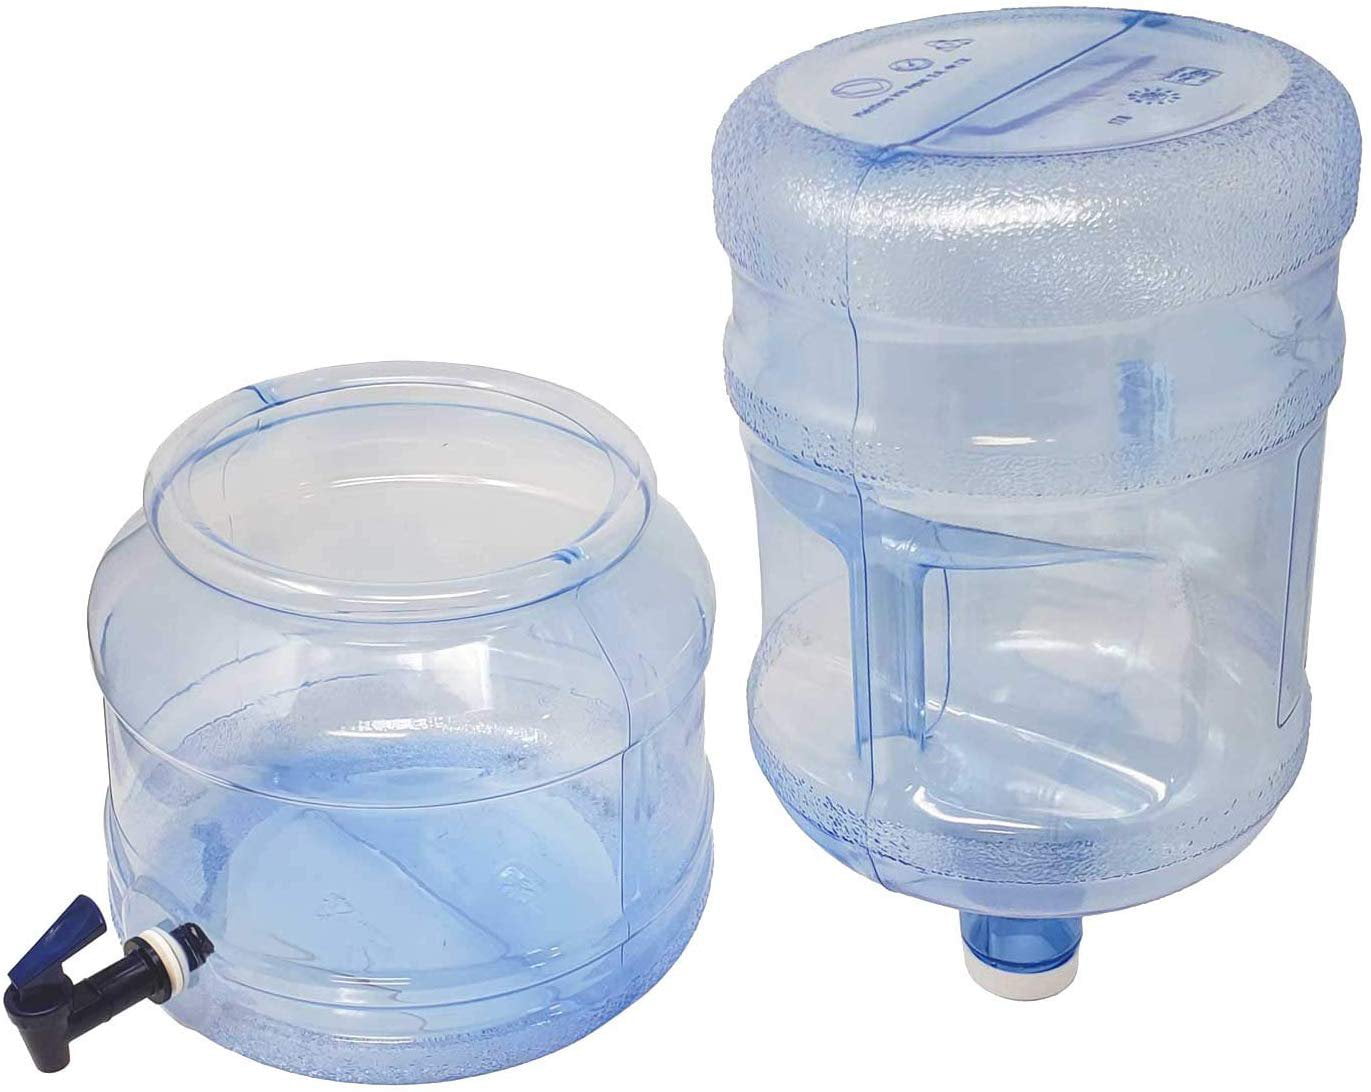 For Countertops or Stands Complete Set BPA FREE Water Dispenser Base with Spigot & 3 Gallon Water Bottle Set Transparent Blue 